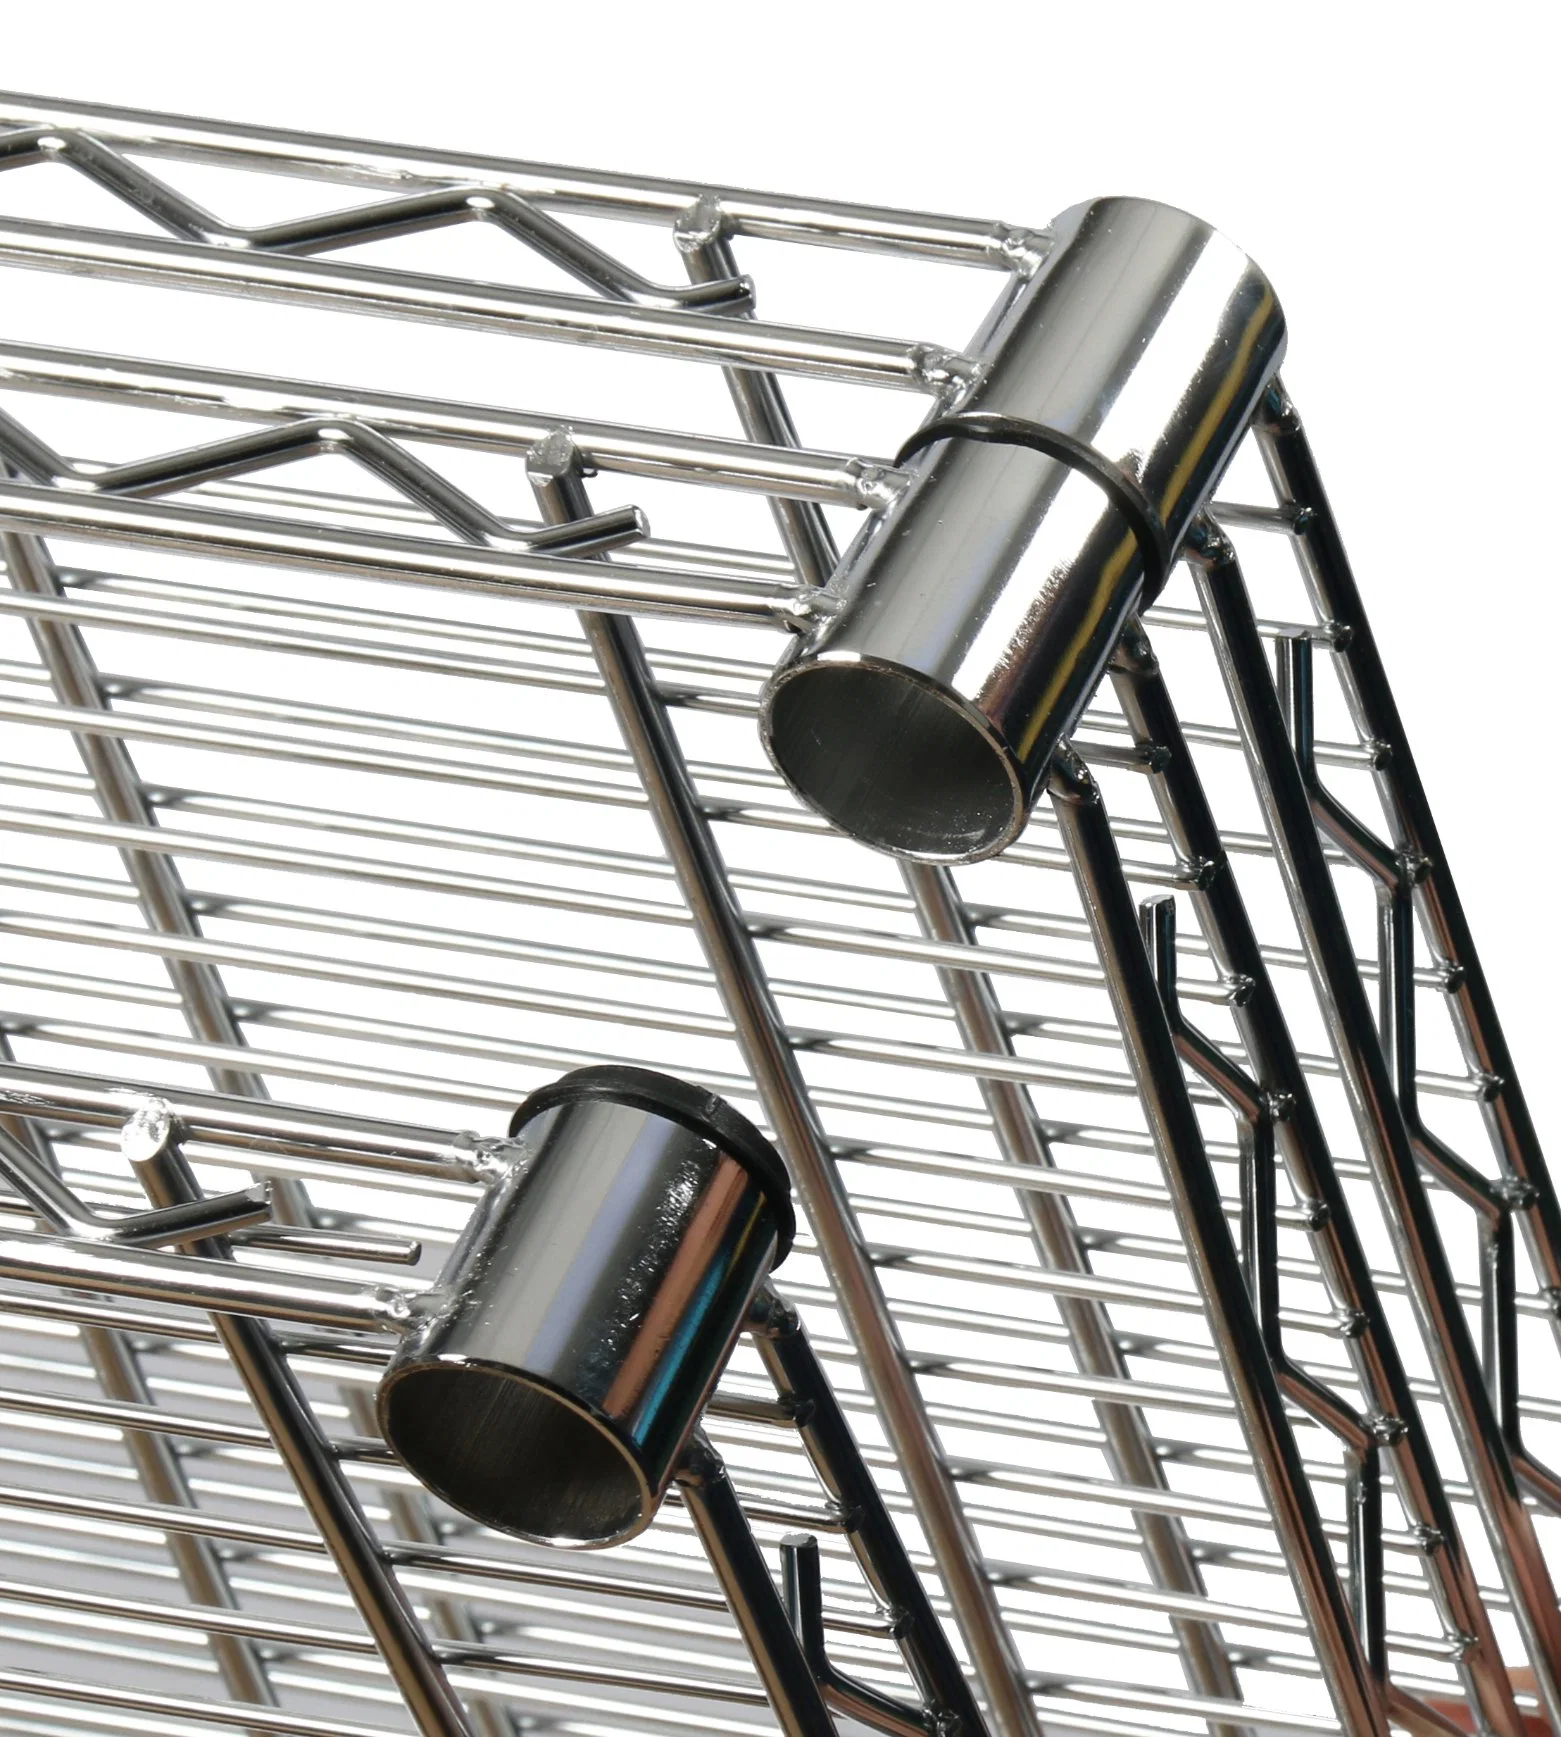 Widely Use Metal Storage Industry Wire Shelving with Storage Bin